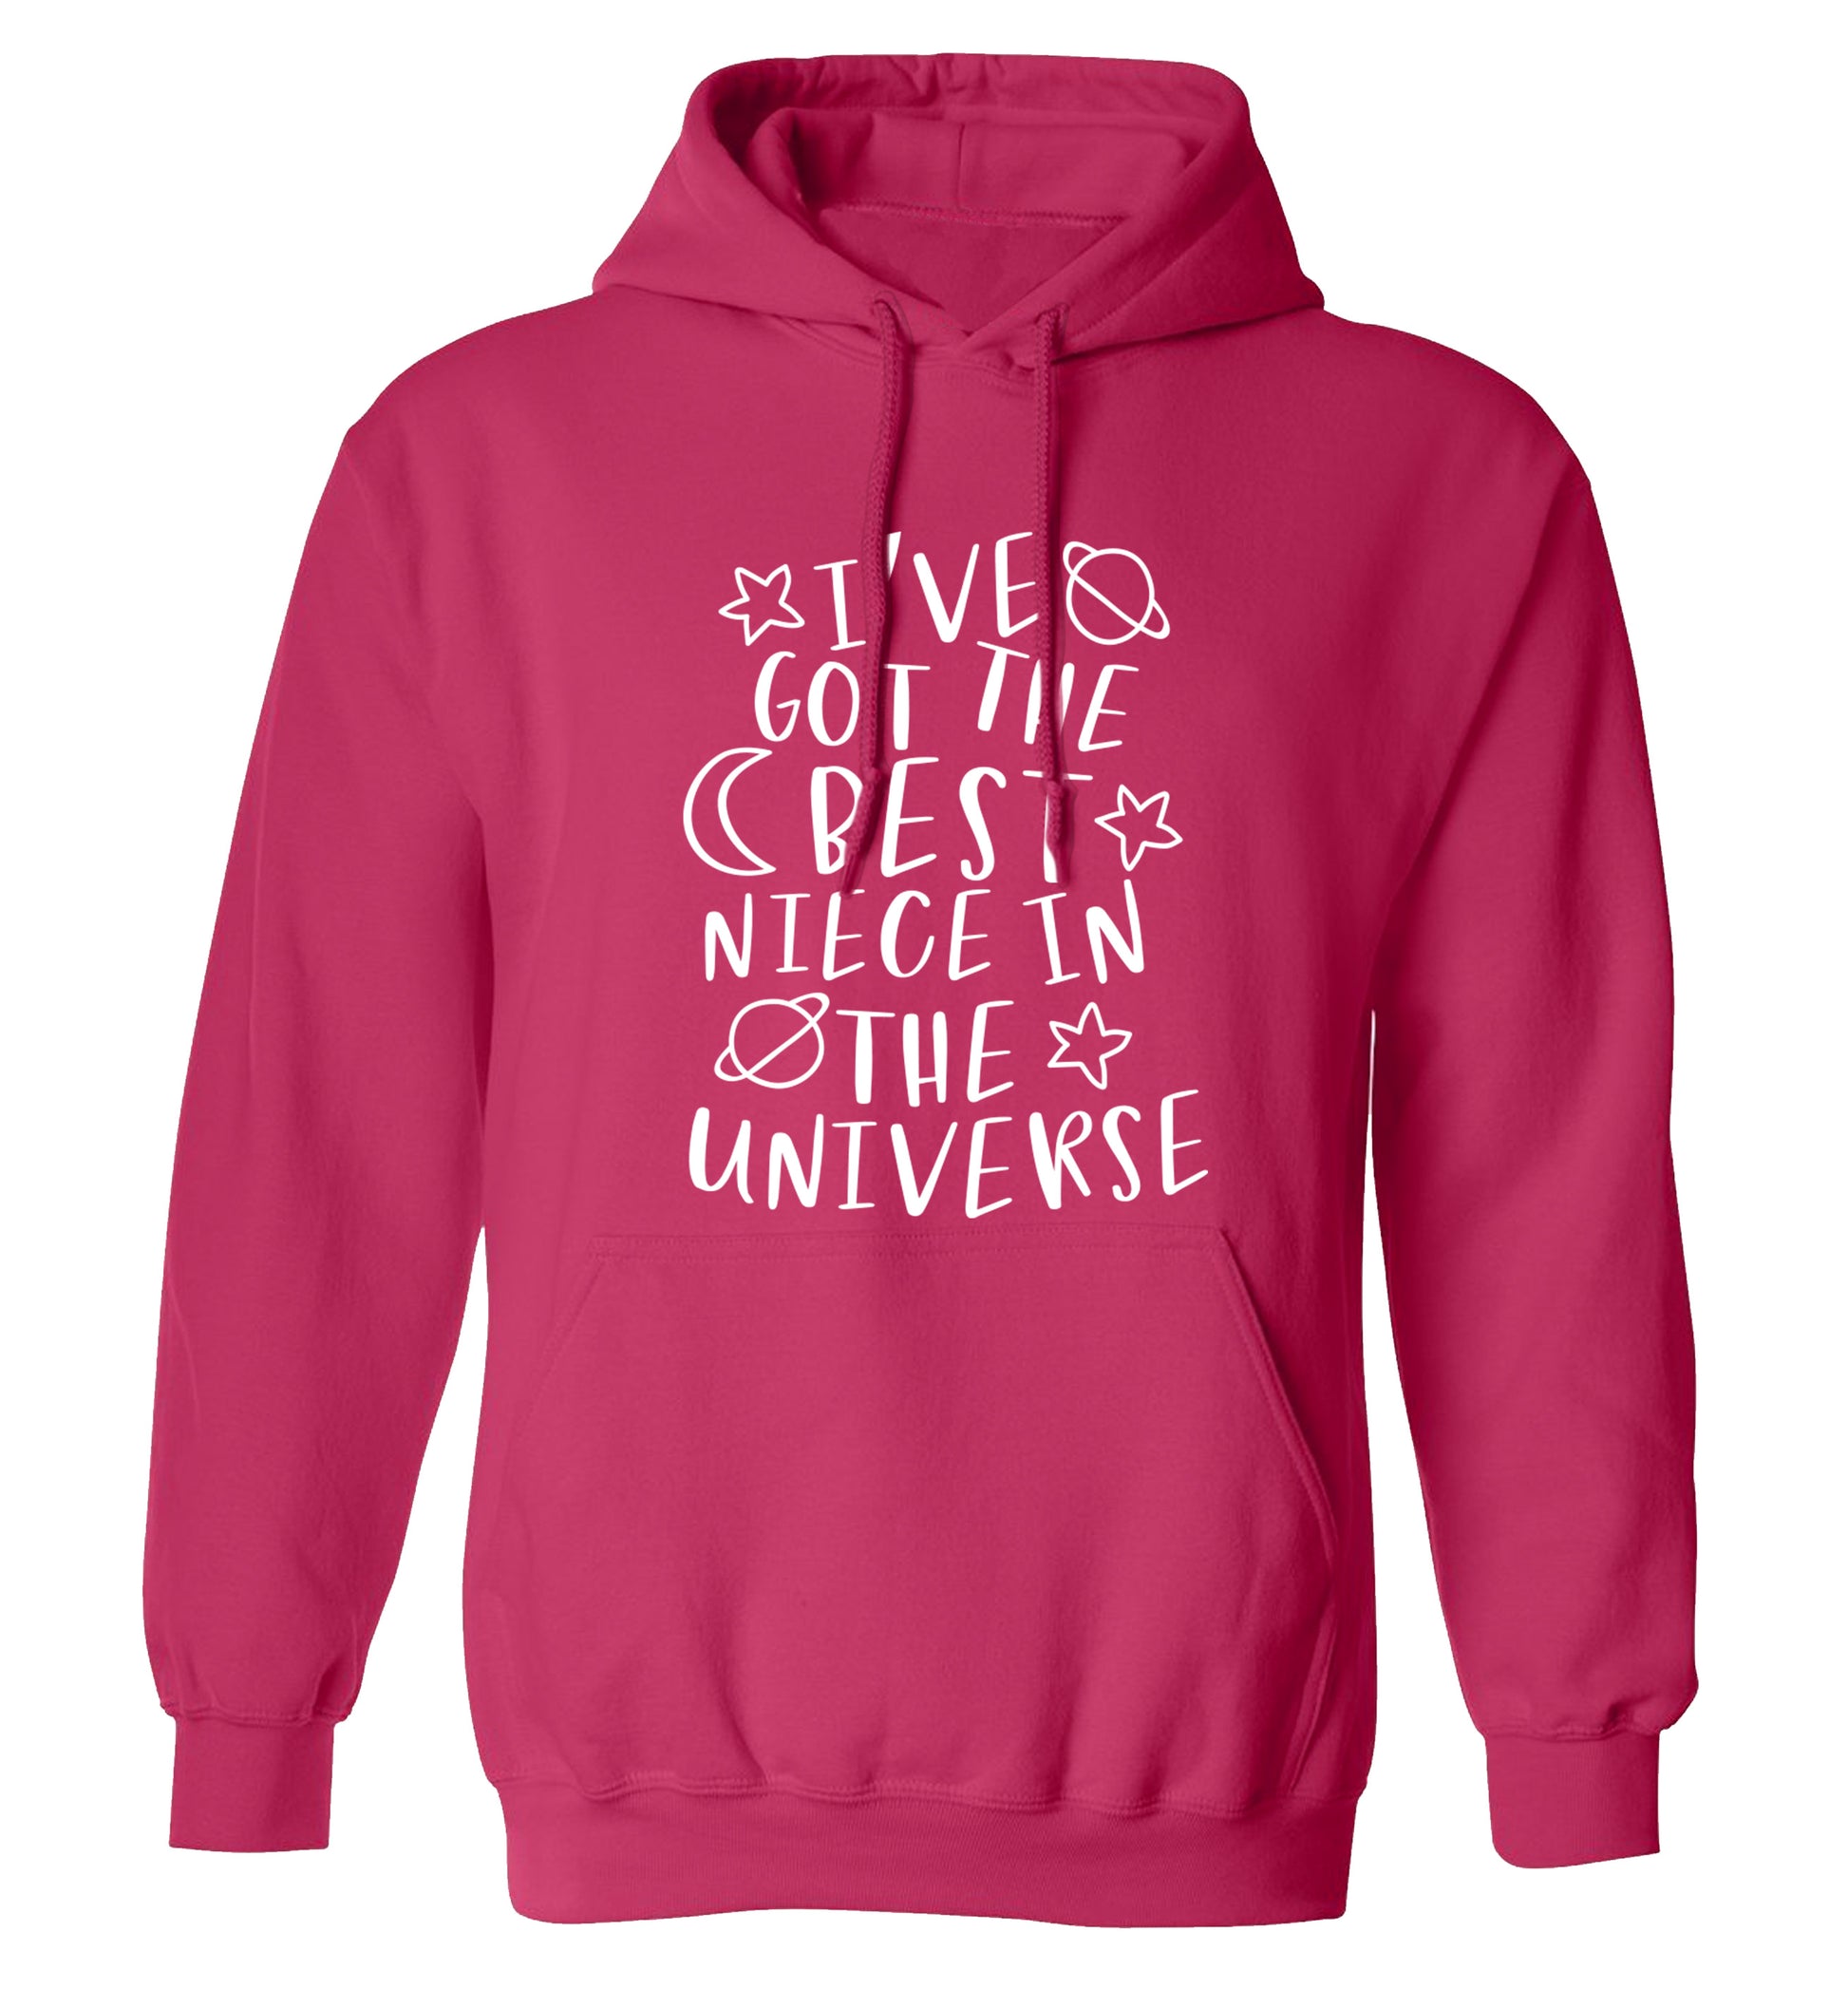 I've got the best niece in the universe adults unisex pink hoodie 2XL